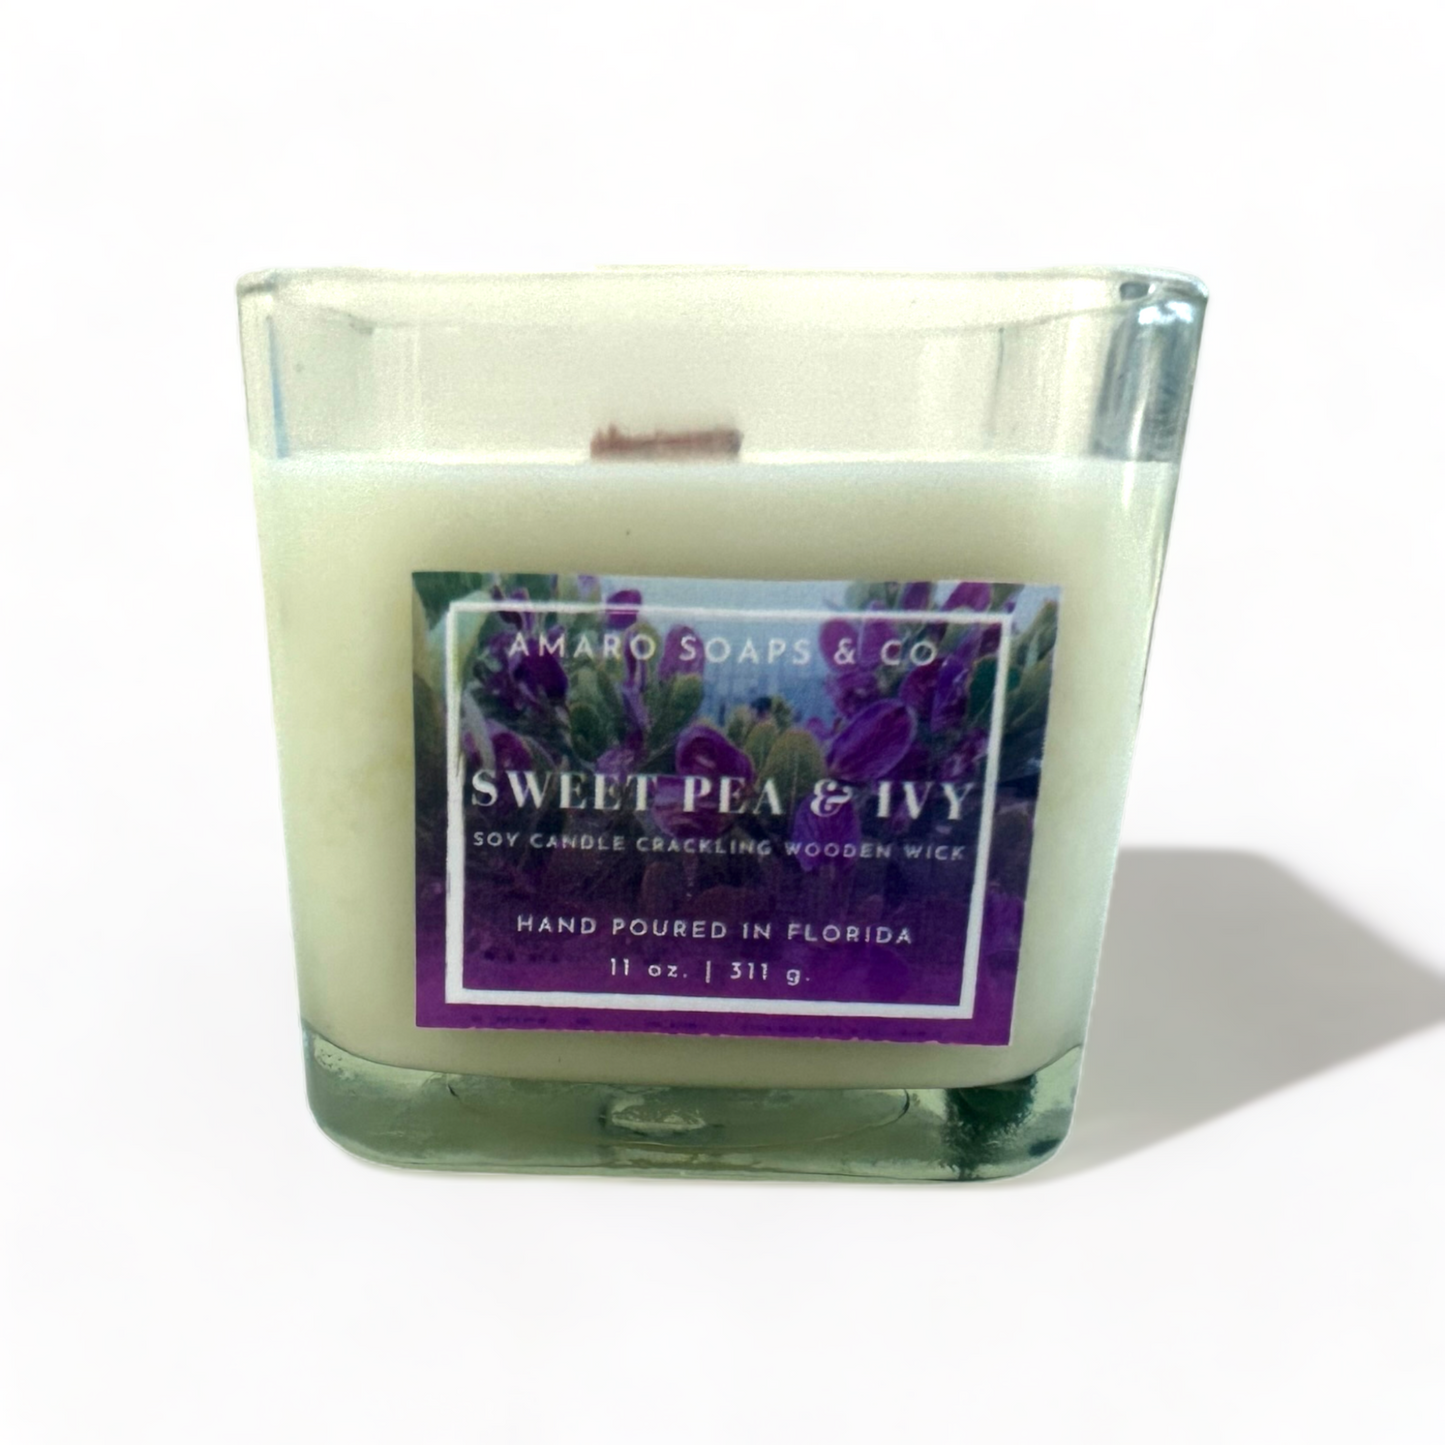 Sweet Pea & Ivy Wooden Wick Soy Candle